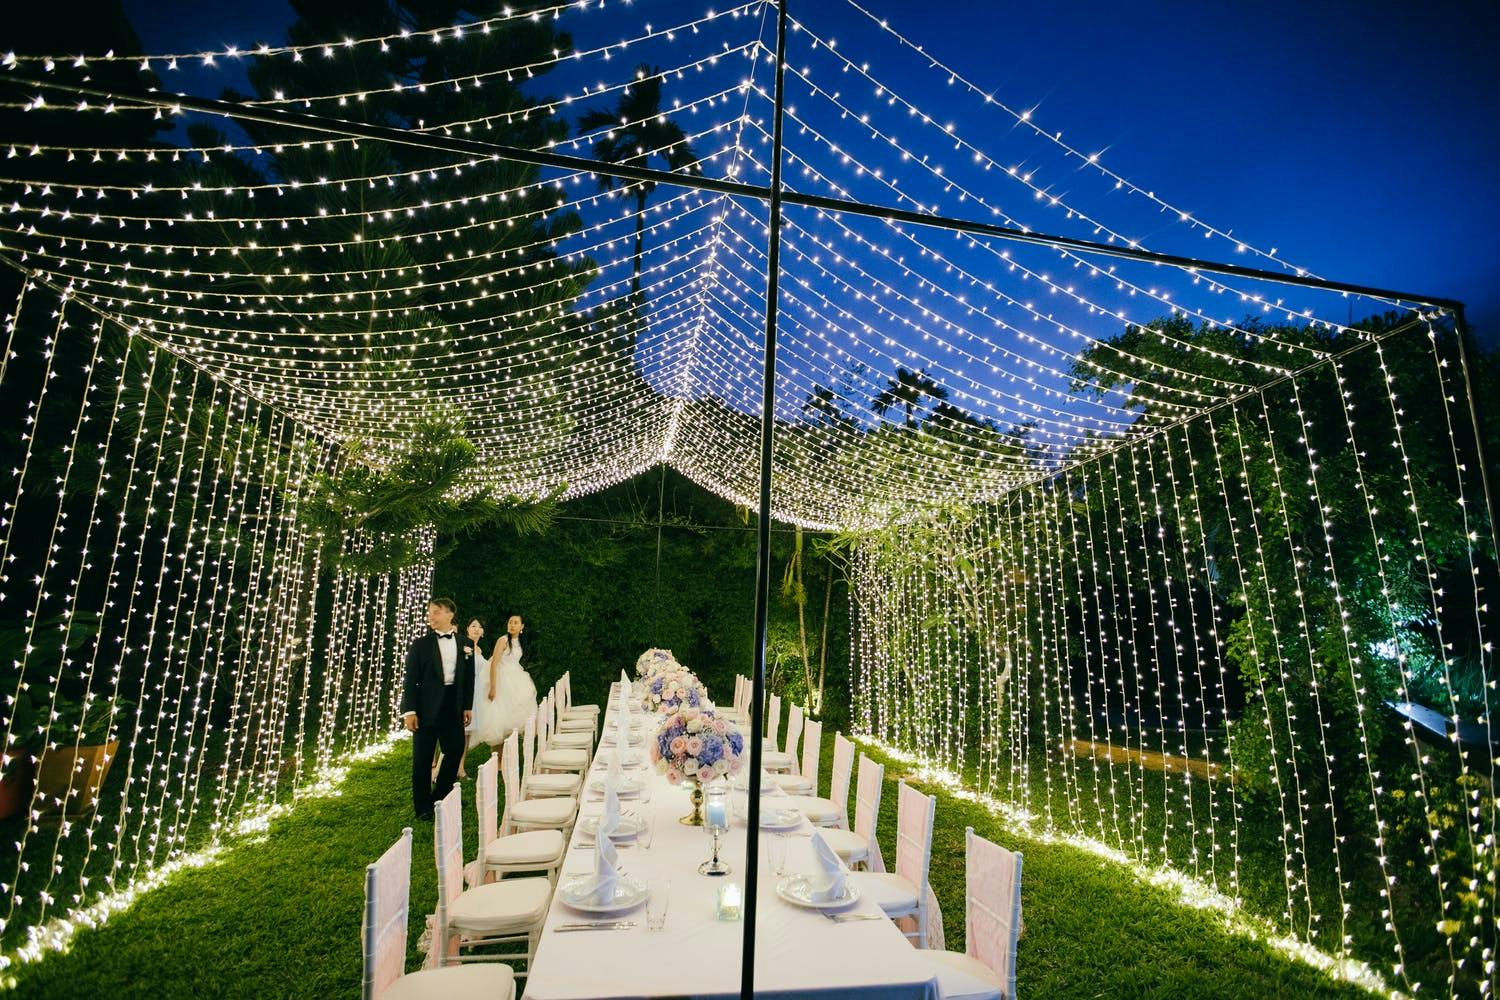 Glamorous large string light tent 2021 trend | PartySlate